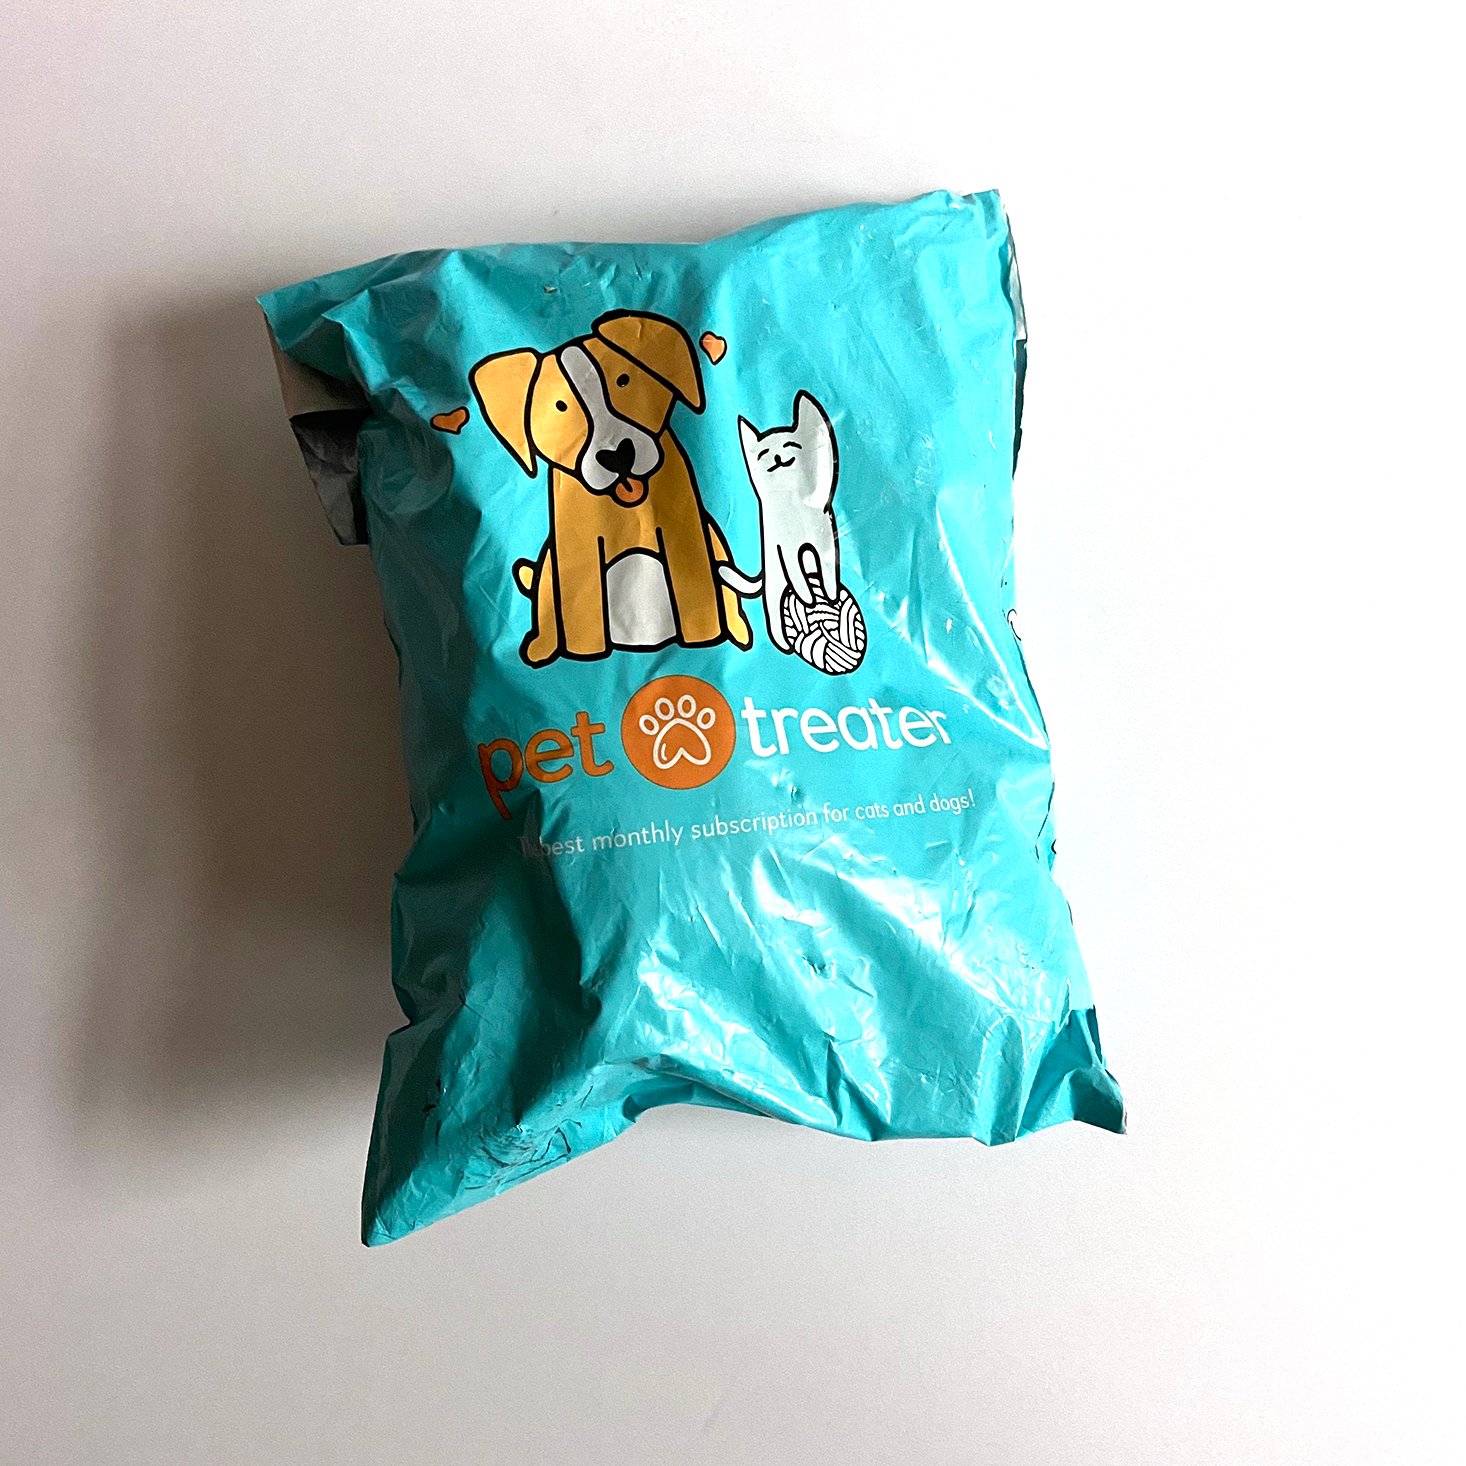 Pet Treater Dog Pack Subscription Review – December 2020